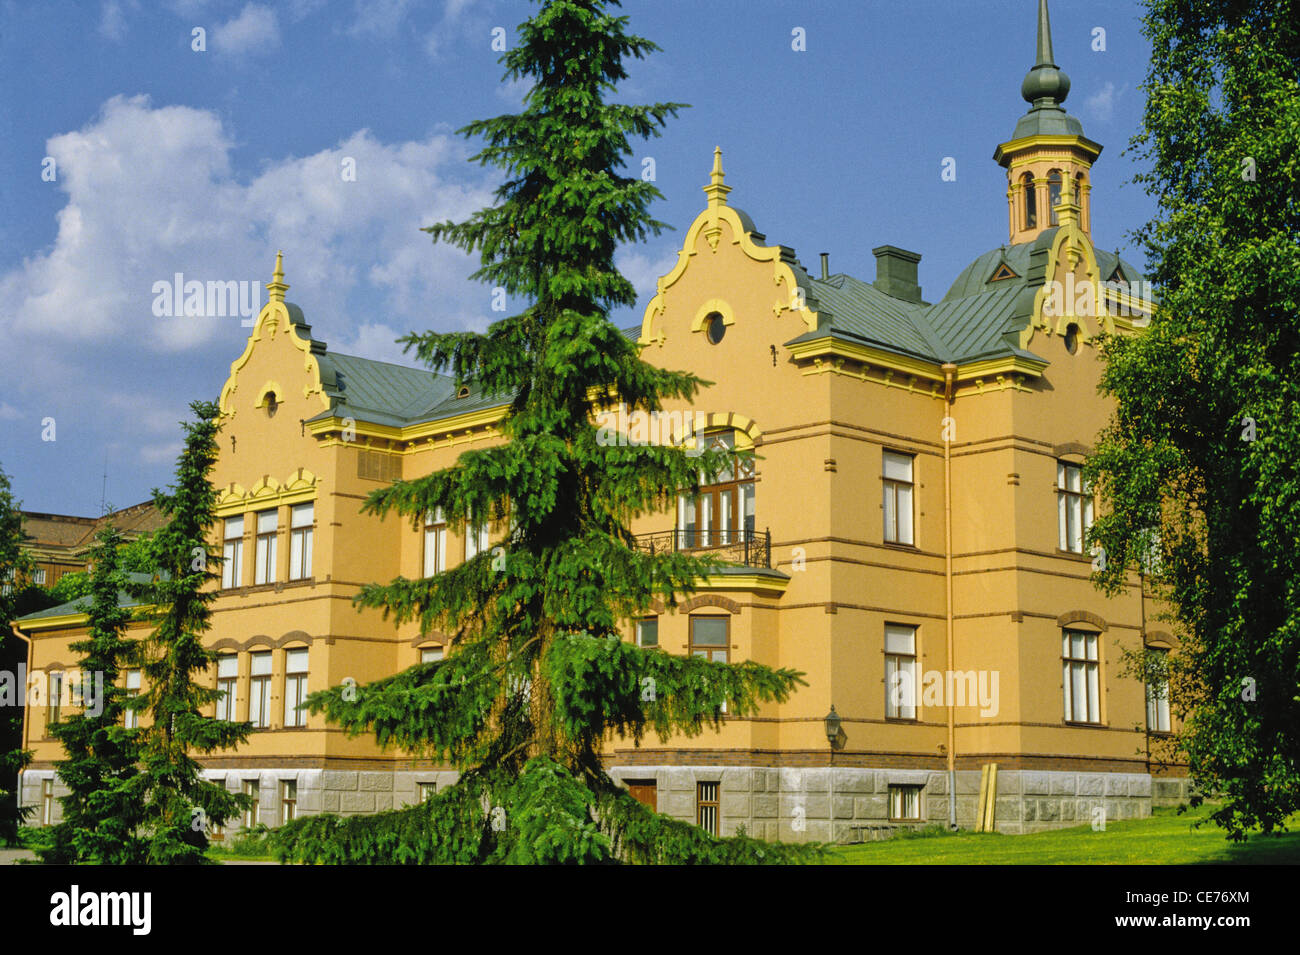 Lahti Historical Museum is housed in the former main building of Lahti Manor House in Lahti, Finland. Stock Photo